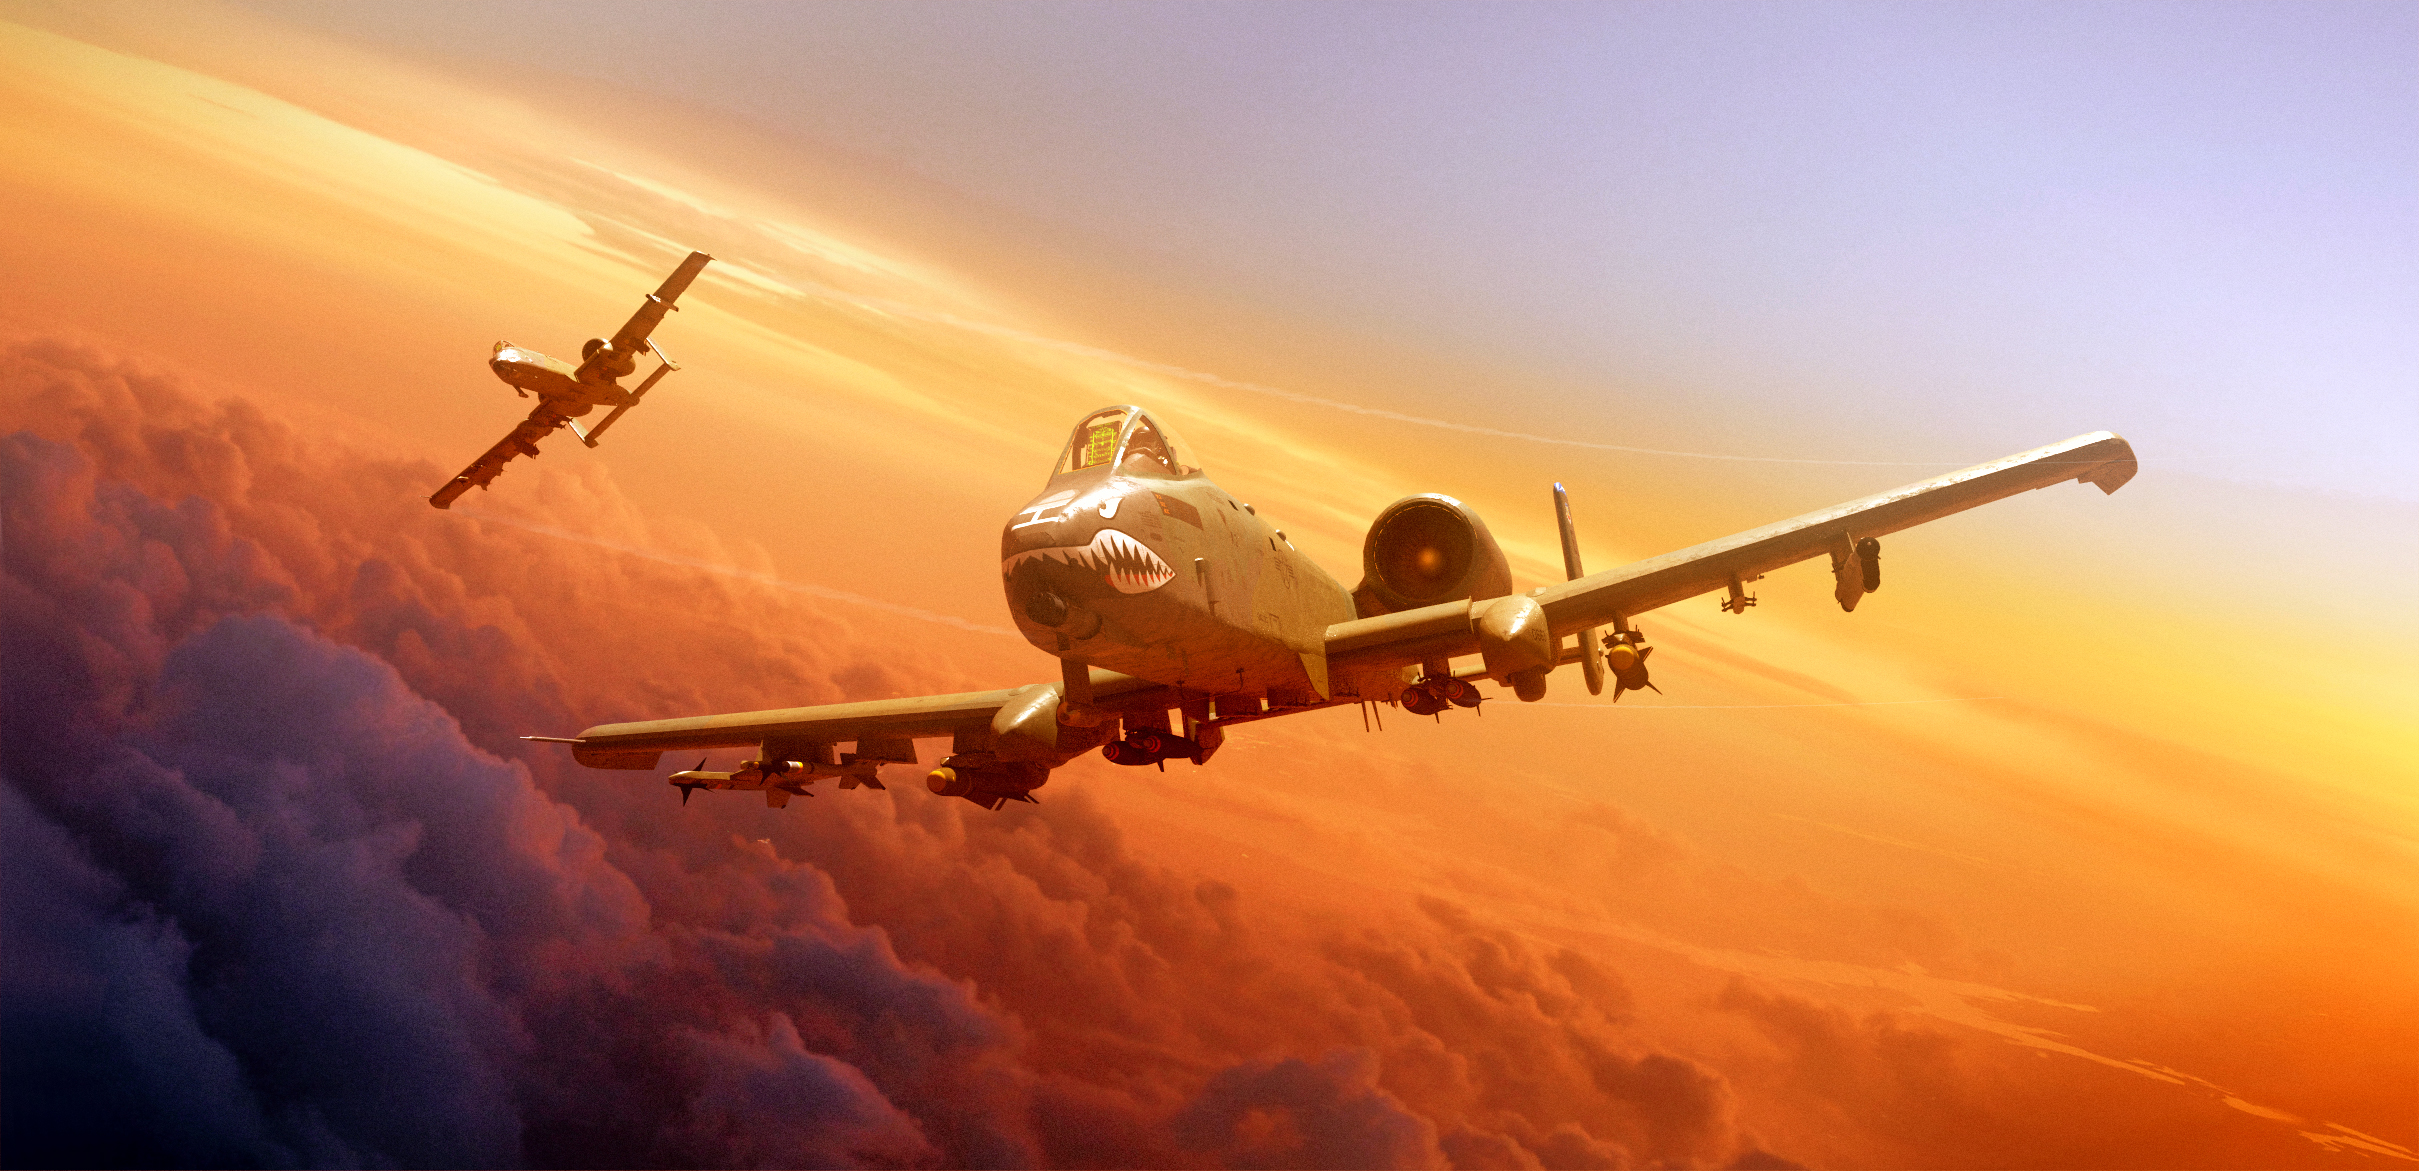 Plane And Clouds Artistic Digital Art Wallpapers